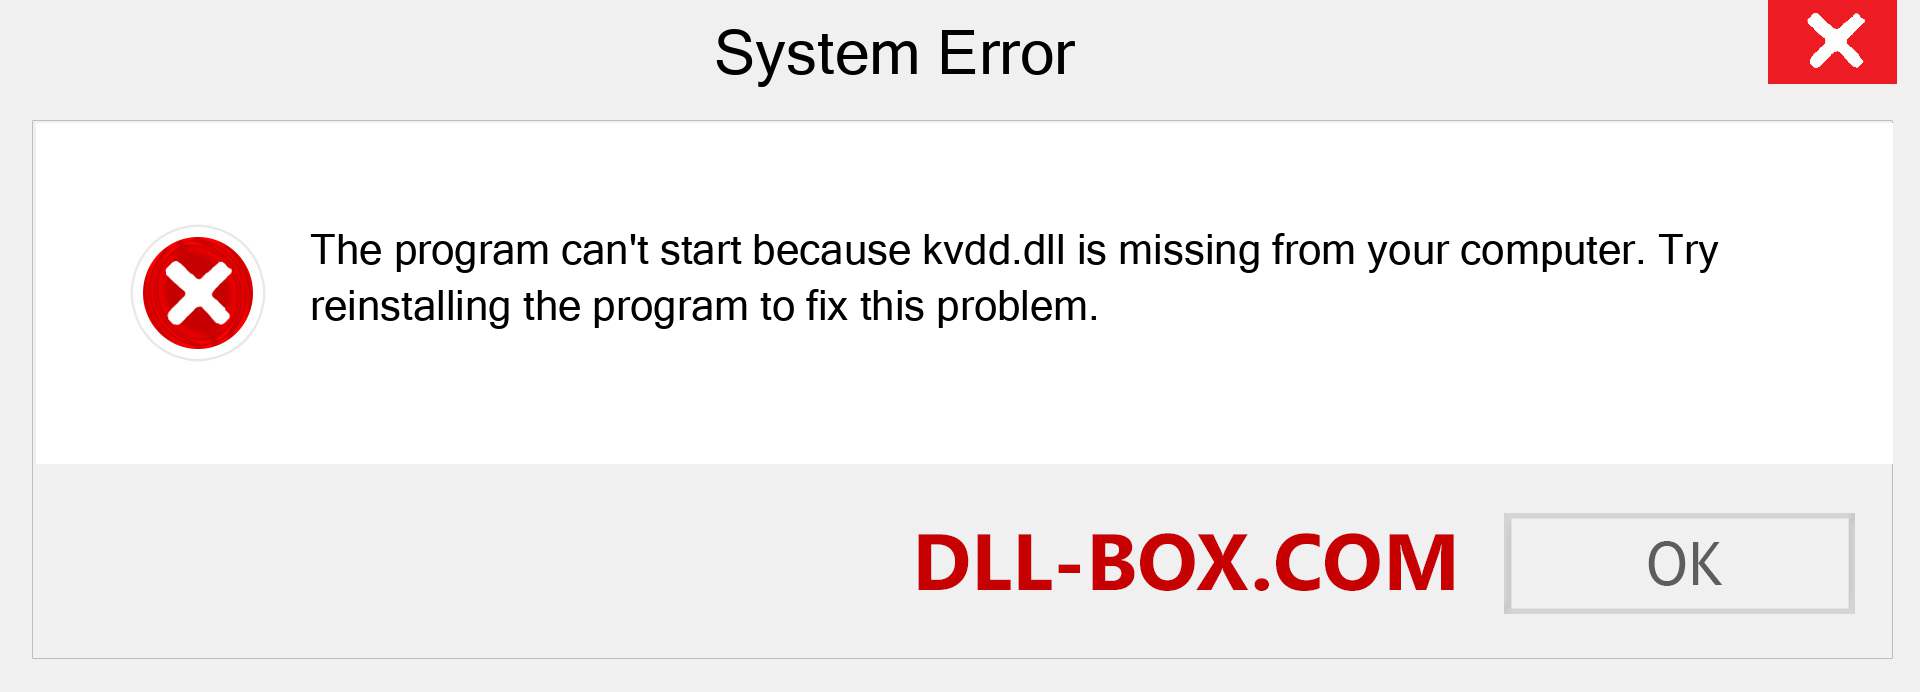  kvdd.dll file is missing?. Download for Windows 7, 8, 10 - Fix  kvdd dll Missing Error on Windows, photos, images